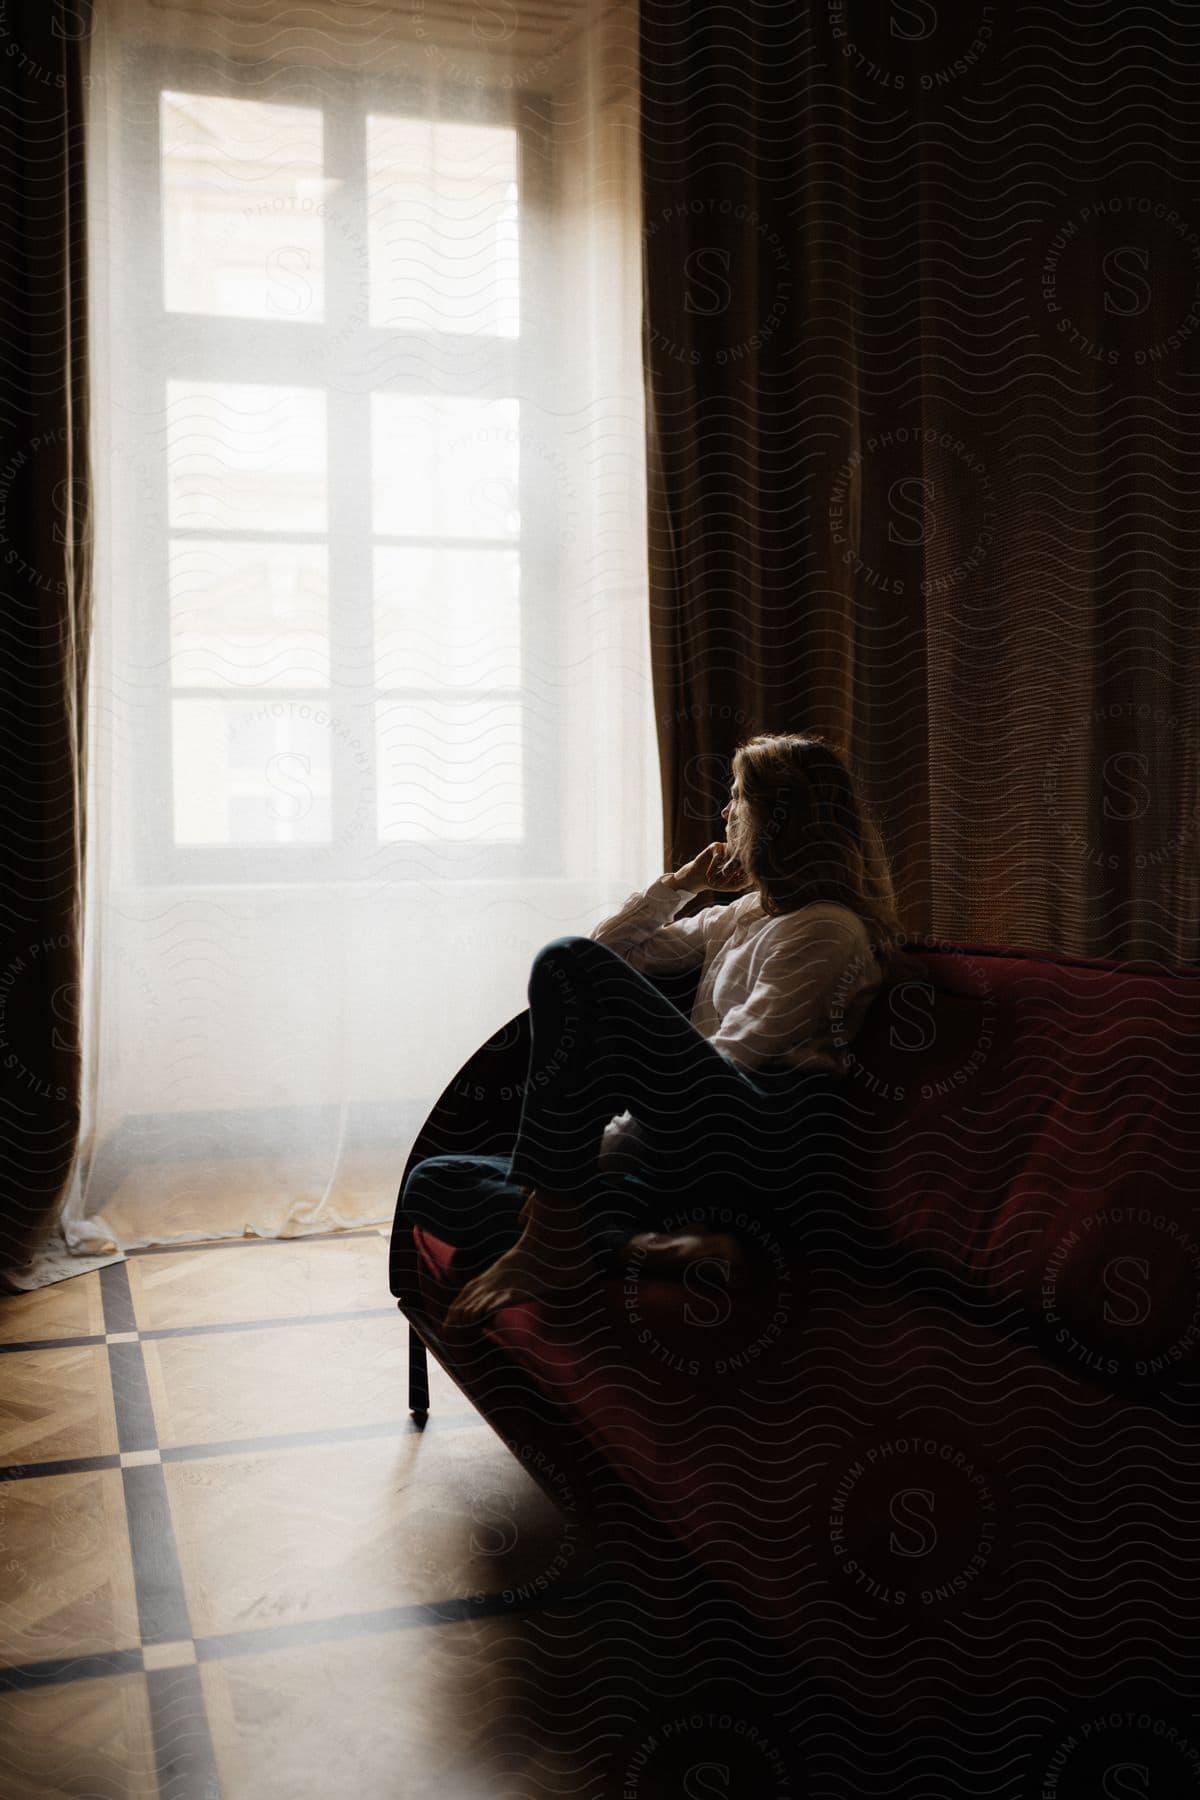 A woman sitting in a large chair stares out a window in a dark room